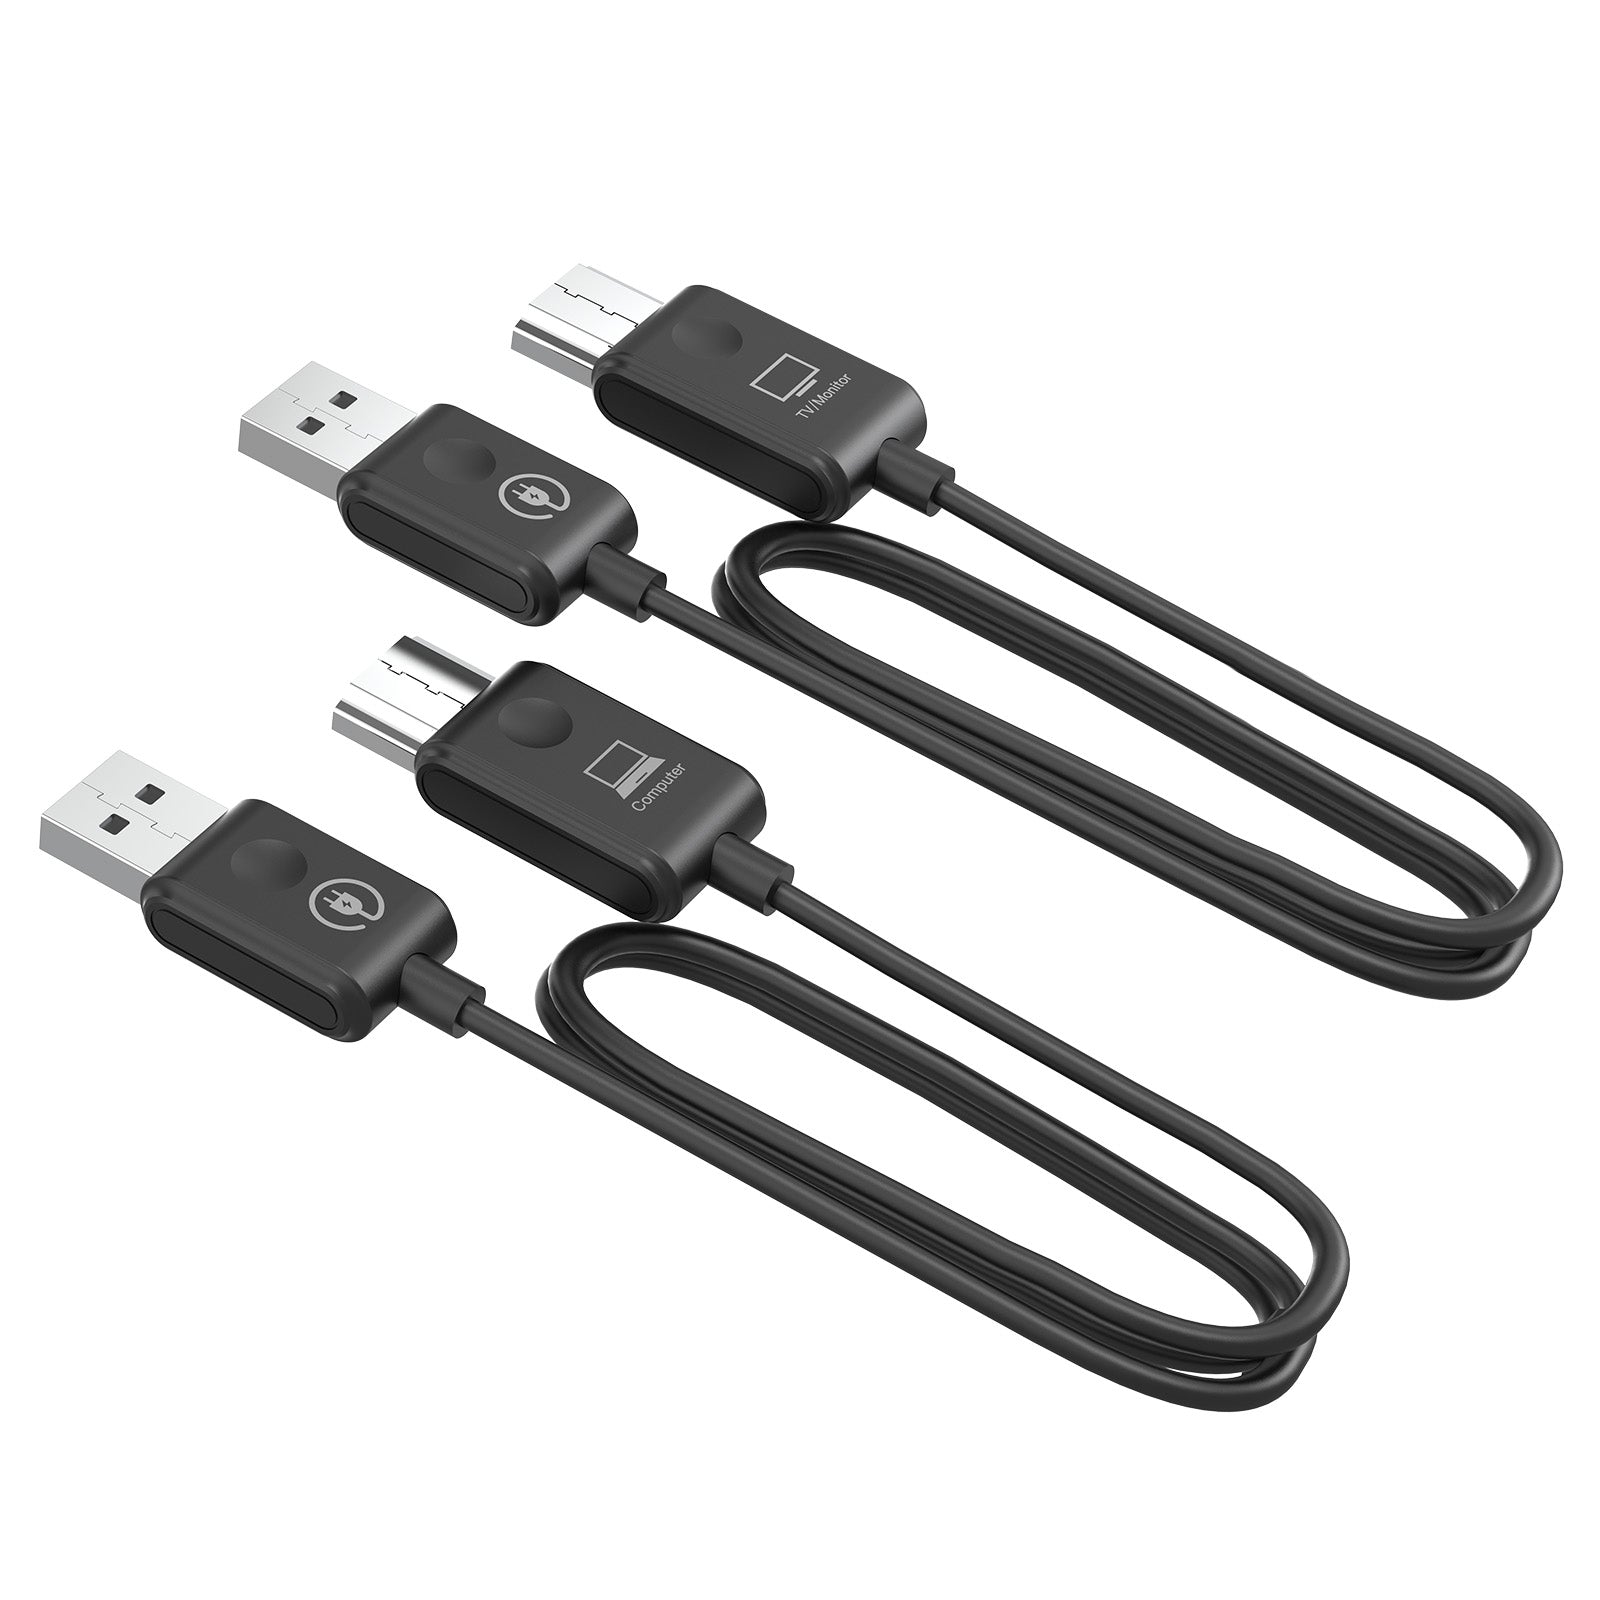 H1 HDMI to HDMI Wireless Display Dongle